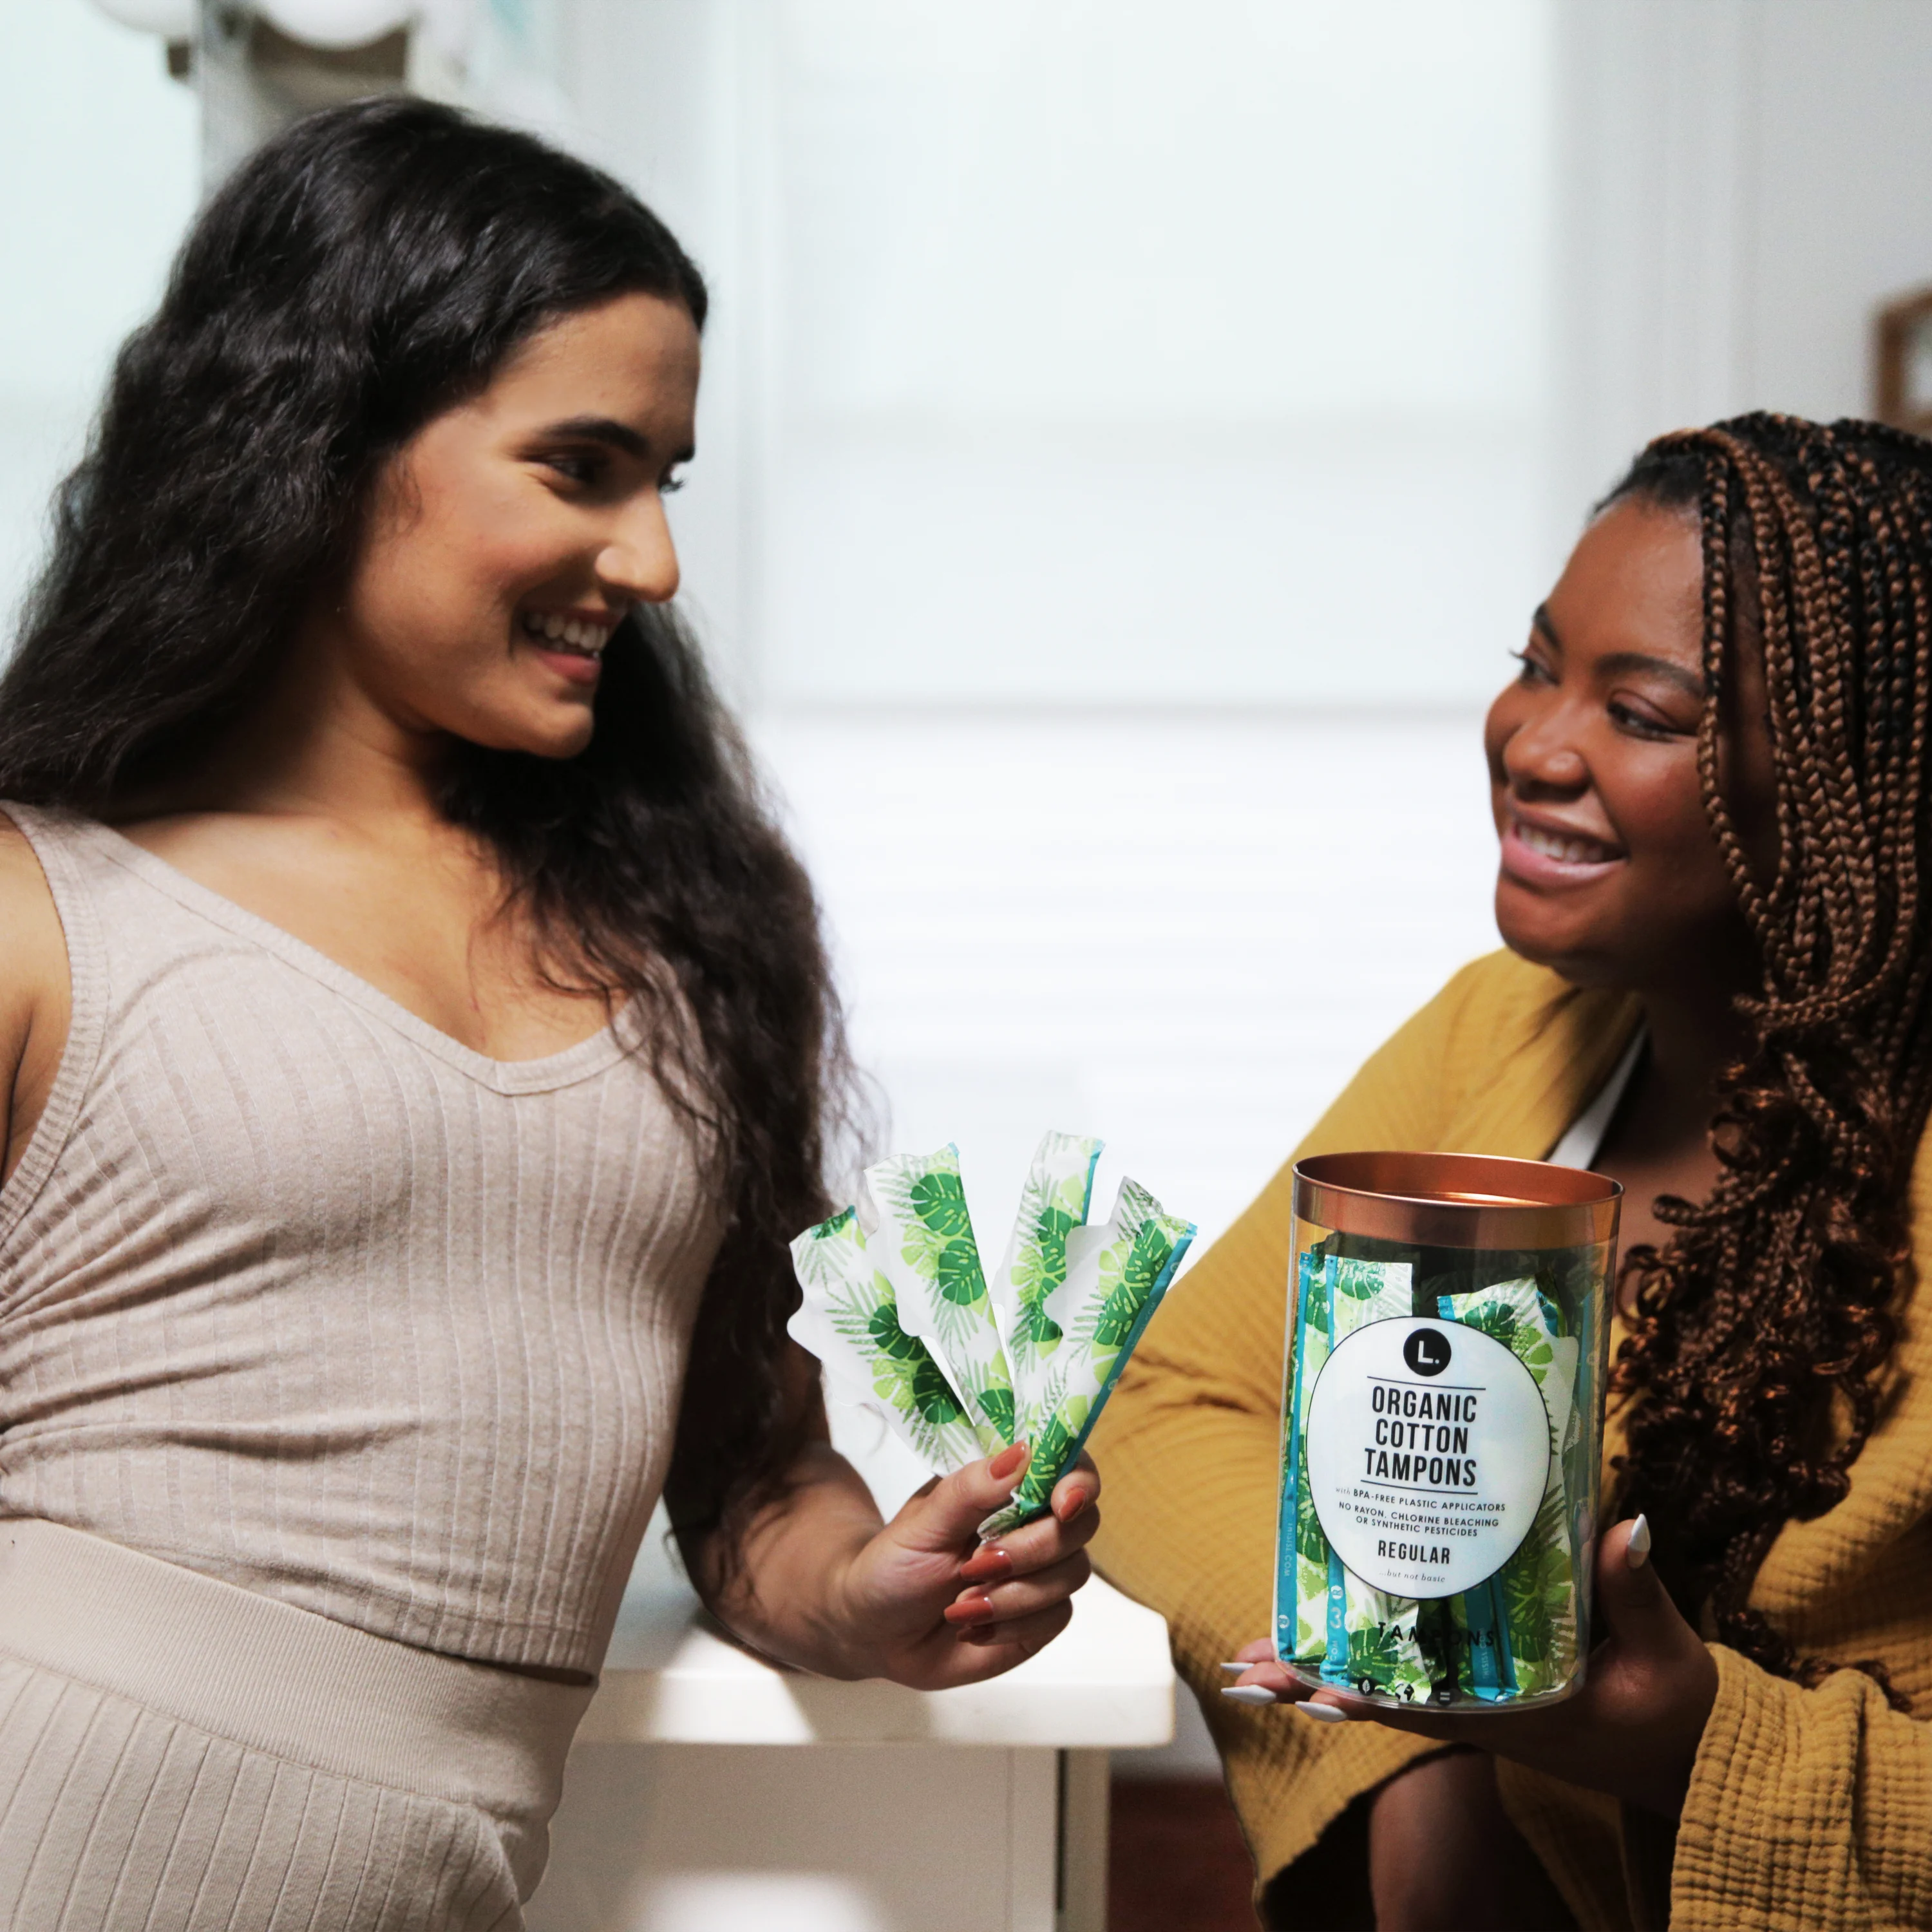 Two women standing next to each other holding a pack of tampons. 